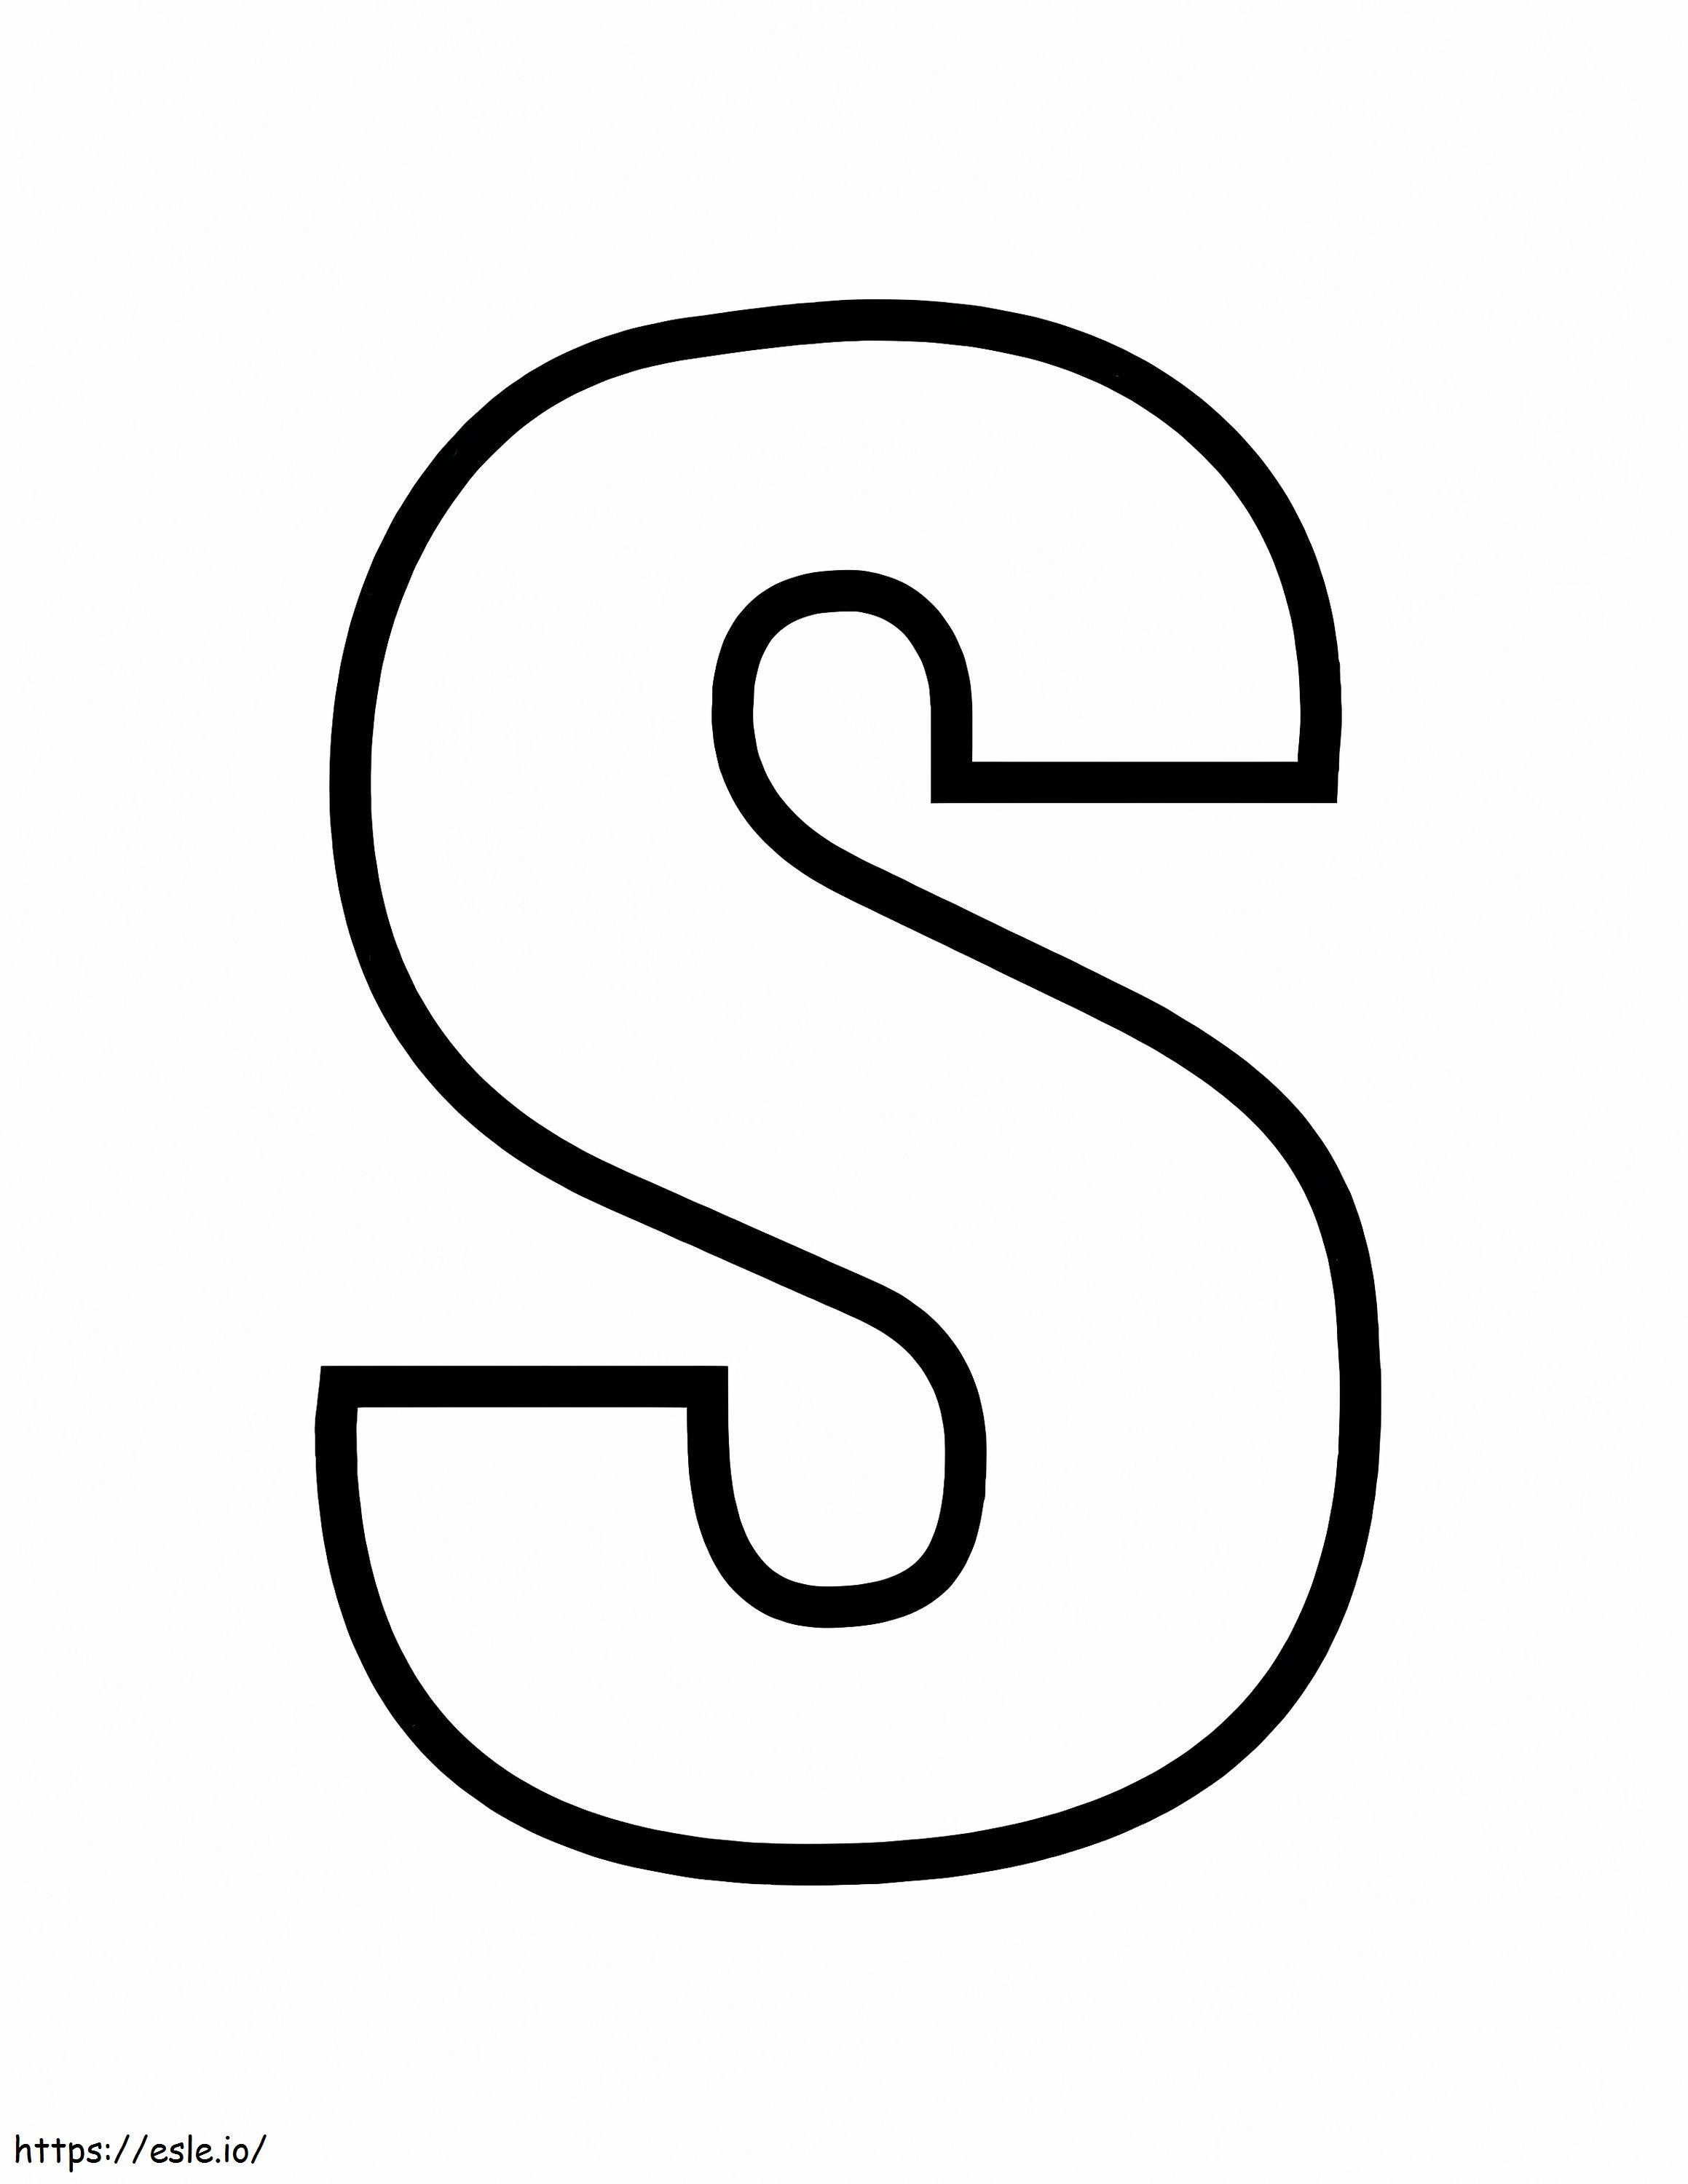 Basic Letter S coloring page